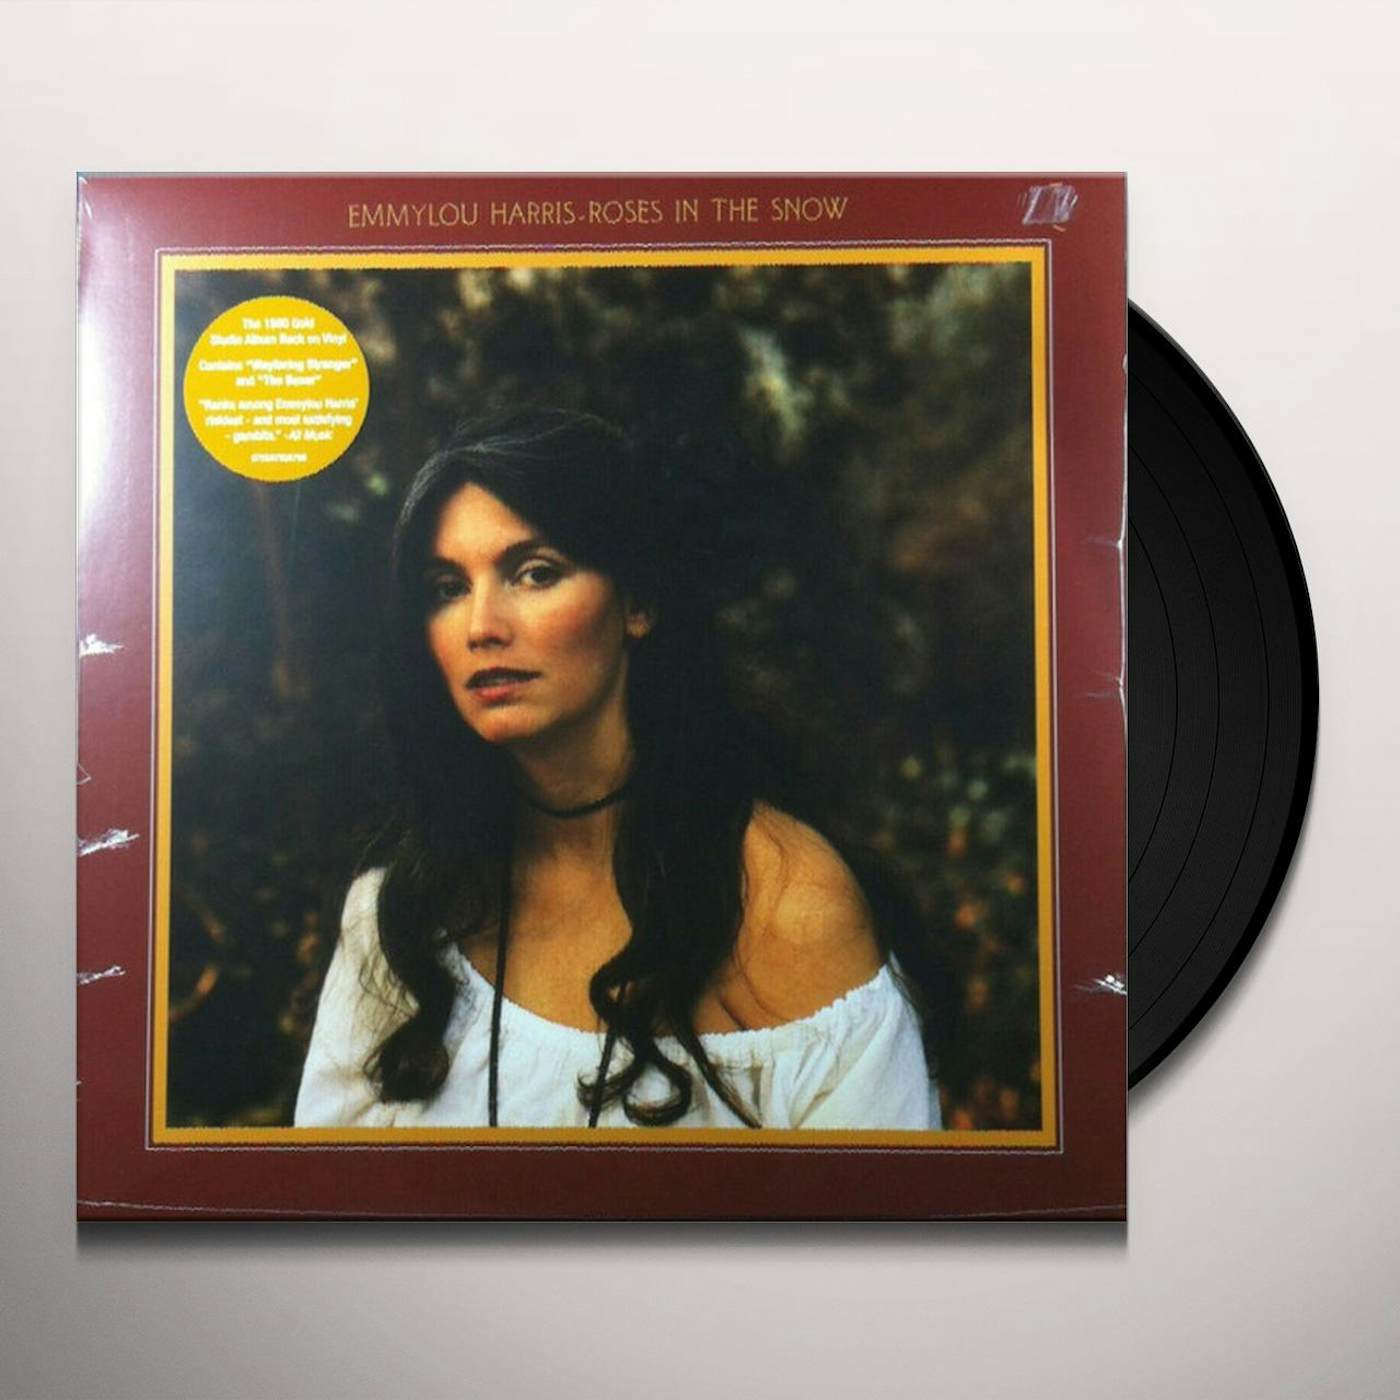 Emmylou Harris ROSES IN THE SNOW Vinyl Record